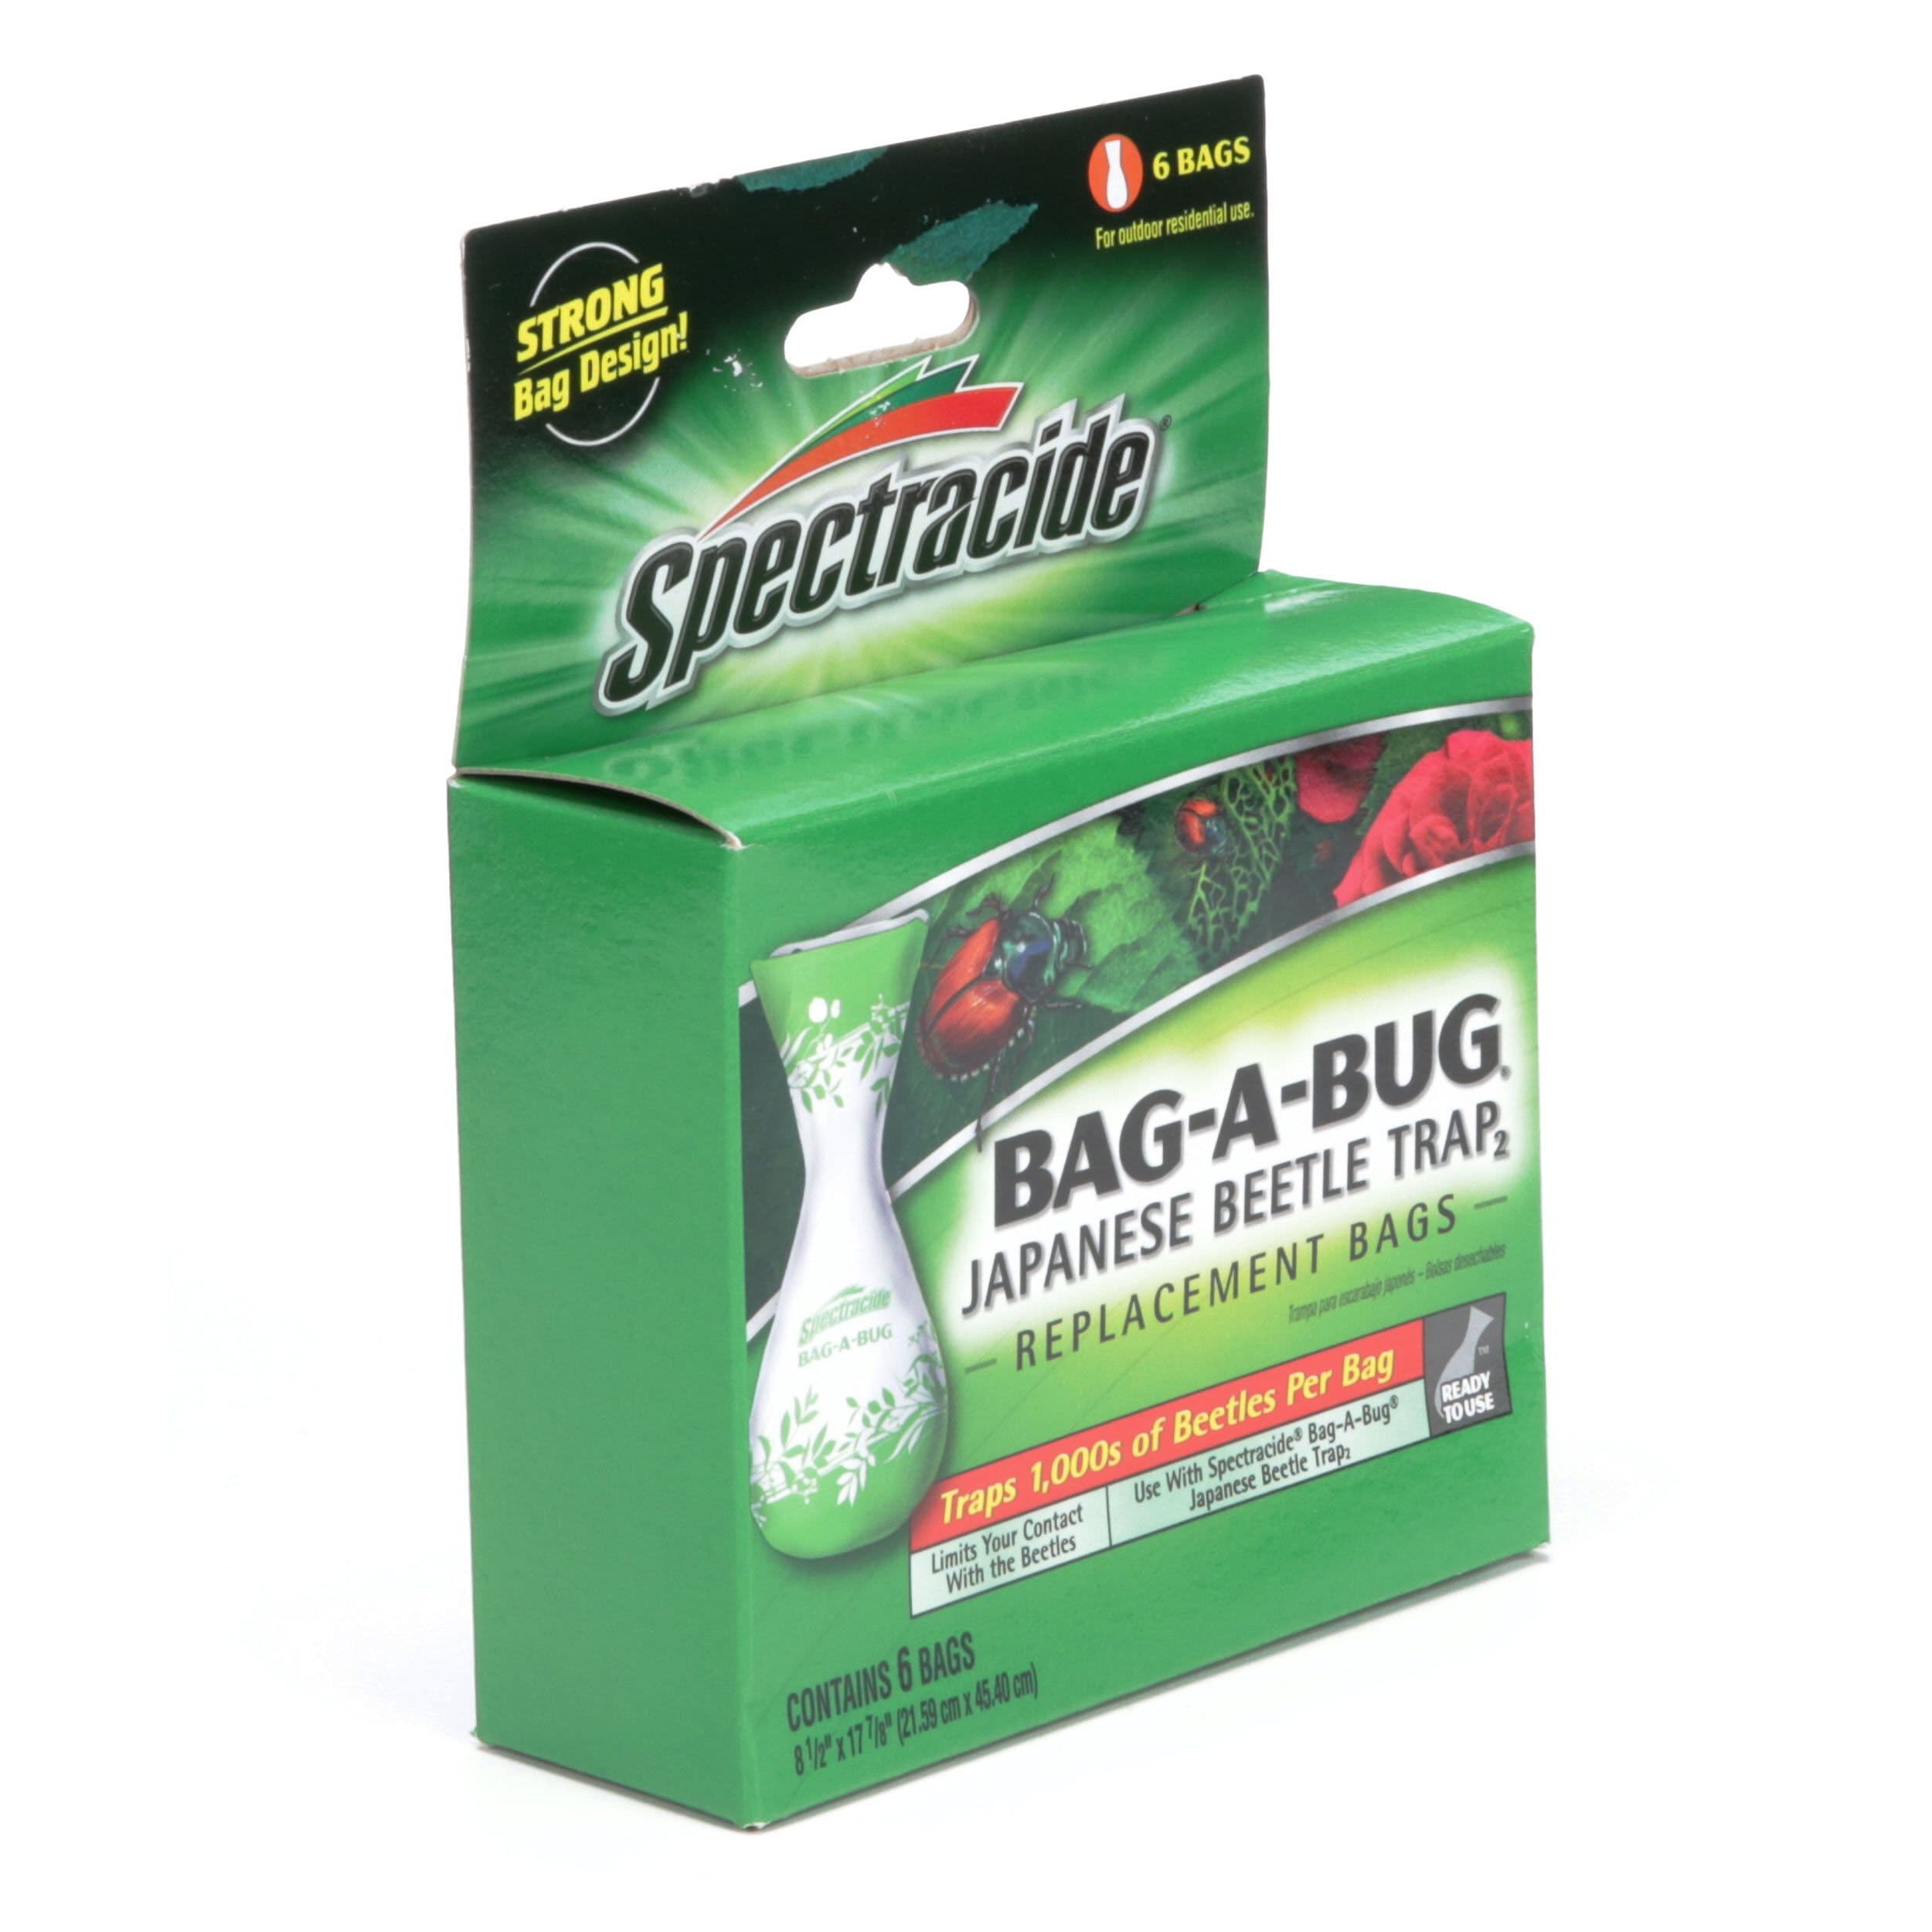 Spectracide Bag-A-Bug Japanese Beetle Trap Pack of 3 